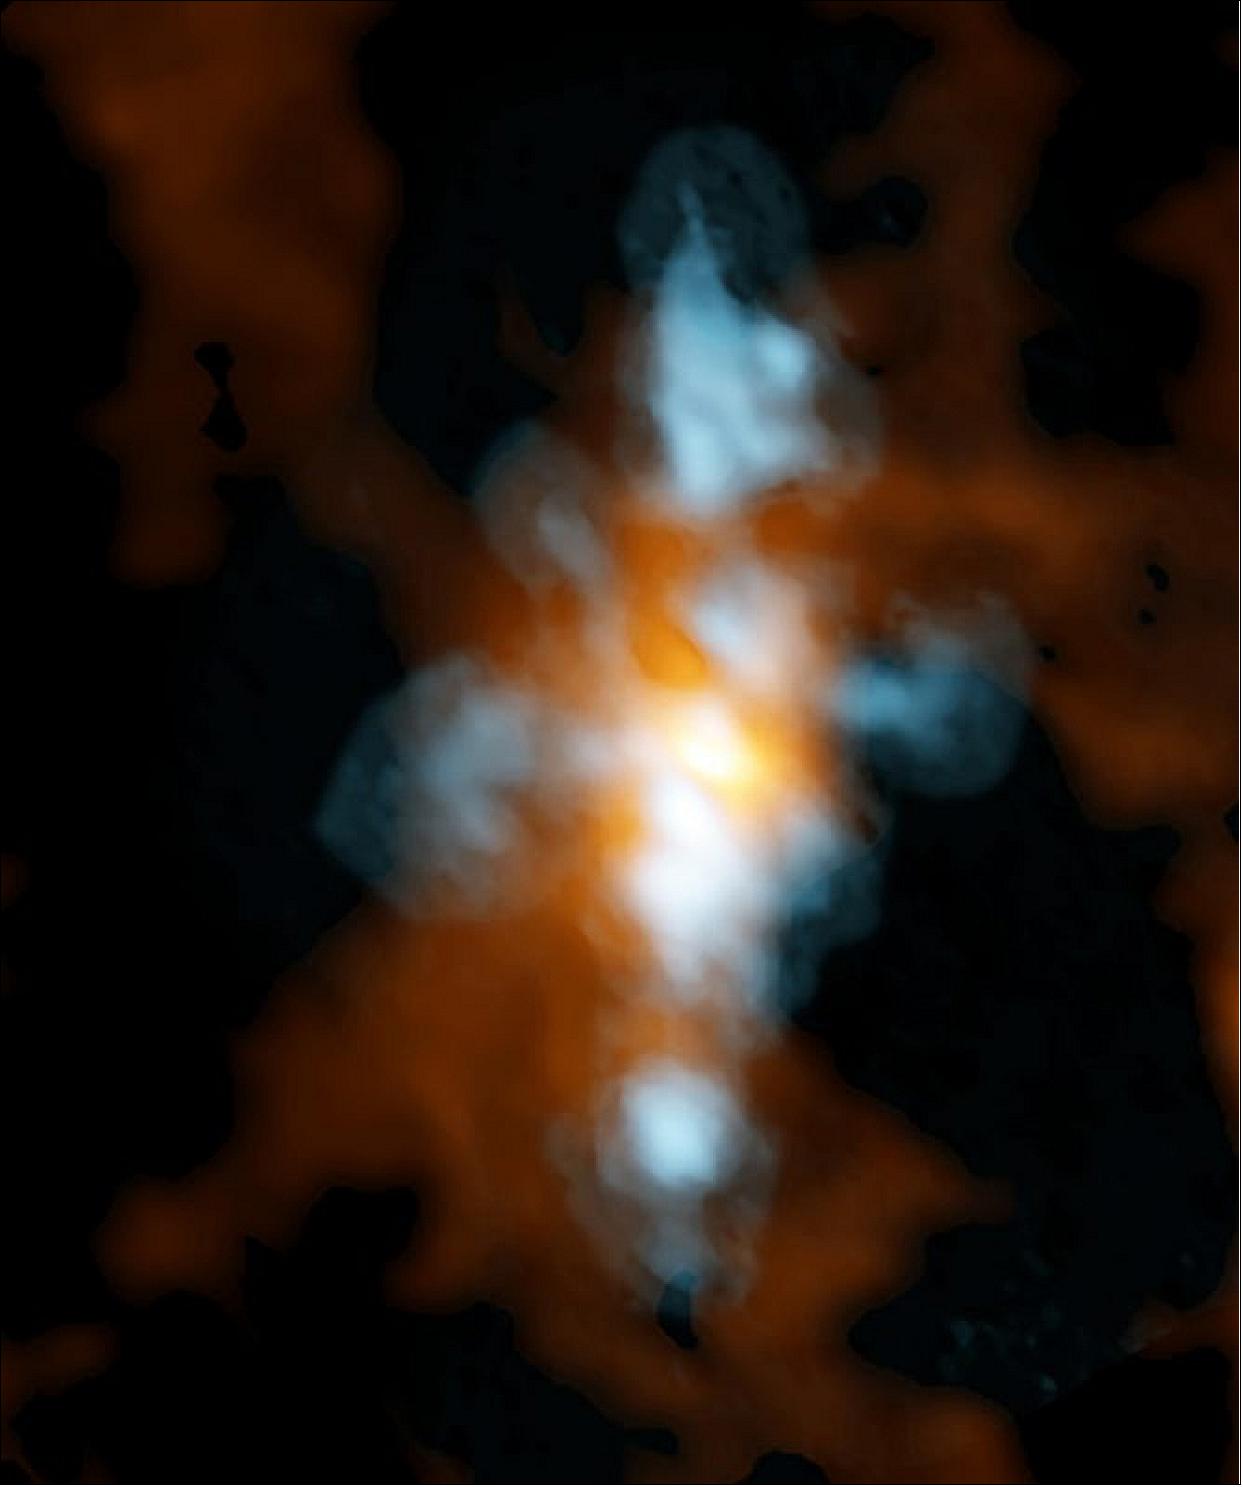 Figure 10: Composite ALMA image of NGC 6334I, a star-forming region in the Cat's Paw Nebula, taken with the Band 10 receivers, ALMA's highest-frequency vision. The blue component is heavy water (HDO) streaming away from either a single protostar or a small cluster of protostars. The orange region is the "continuum emission" in the same region, which scientists found is extraordinarily rich in molecular fingerprints, including glycoaldehyde, the simplest sugar-related molecule (image credit: ALMA (ESO/NAOJ/NRAO): NRAO/AUI/NSF, B. Saxton)